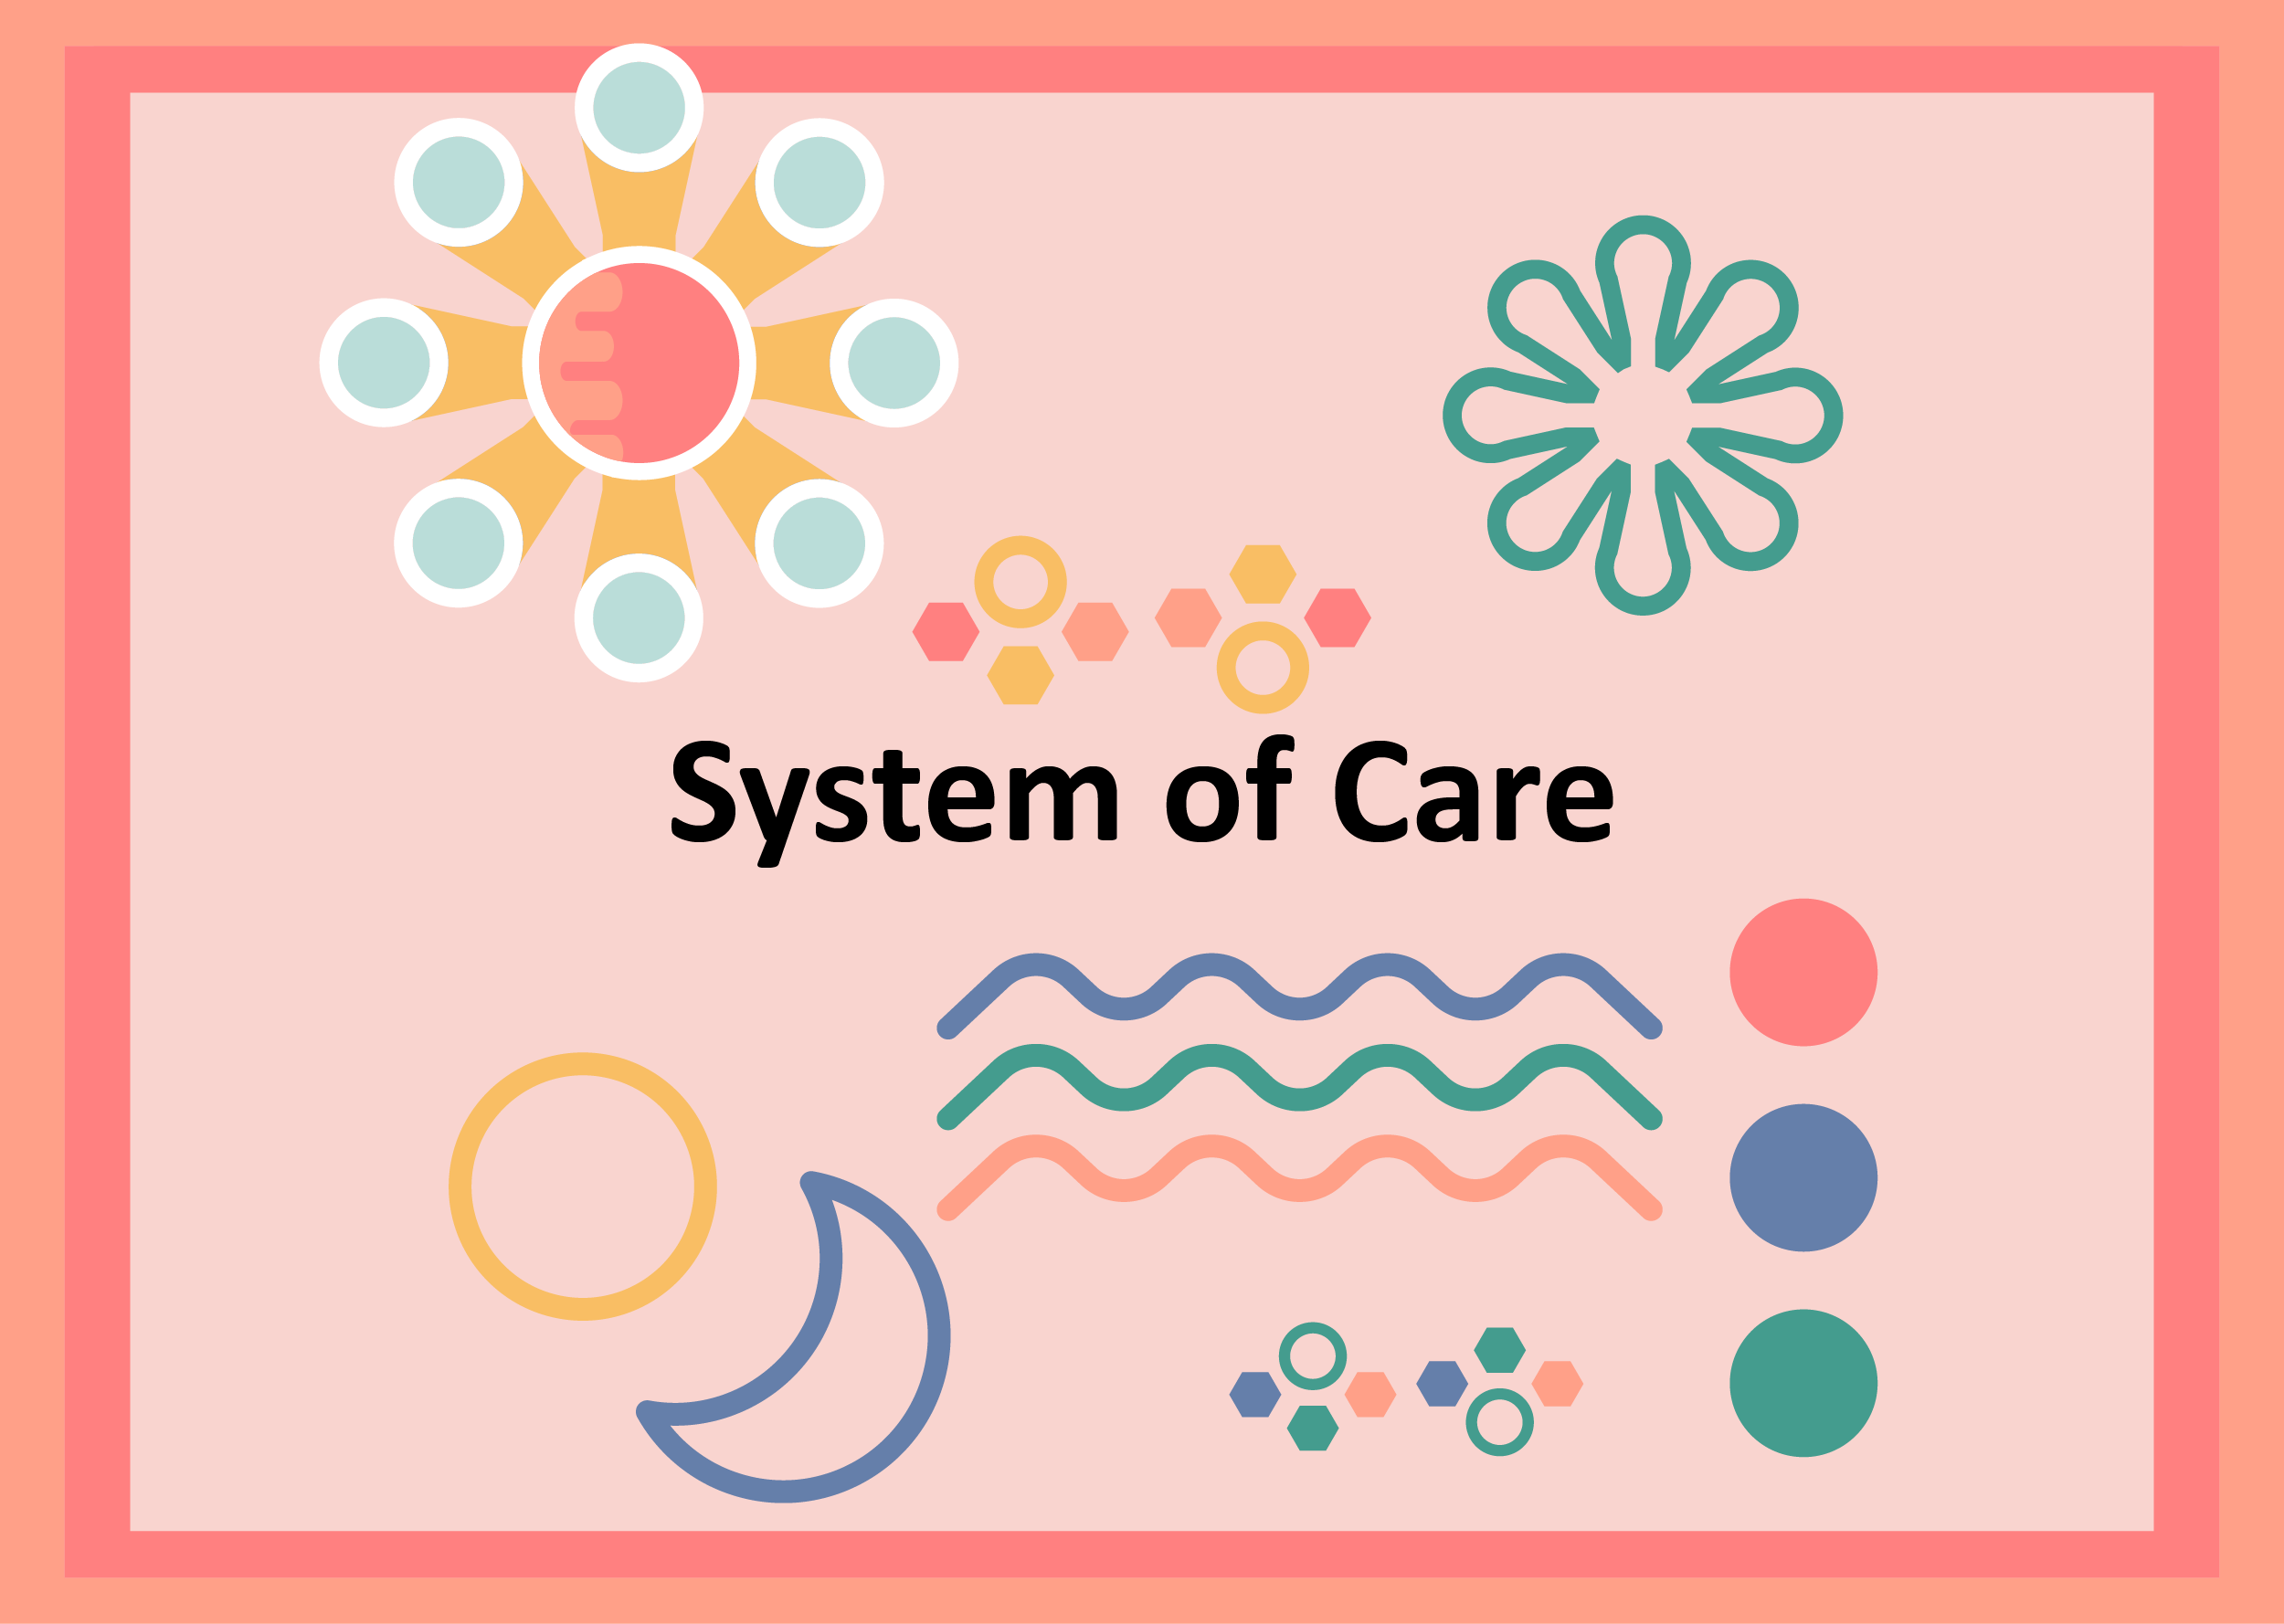 System of Care